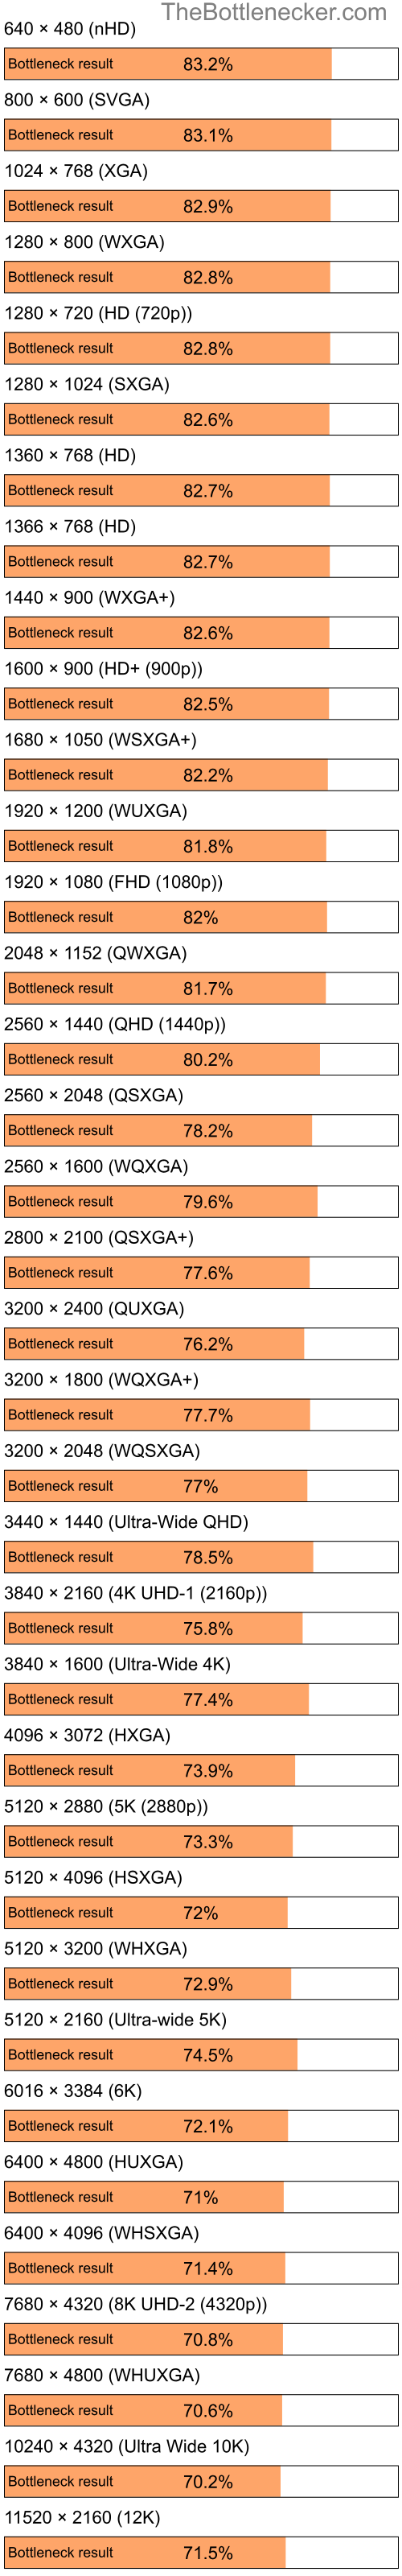 Bottleneck results by resolution for Intel Pentium 4 and NVIDIA GeForce RTX 4060 in Graphic Card Intense Tasks